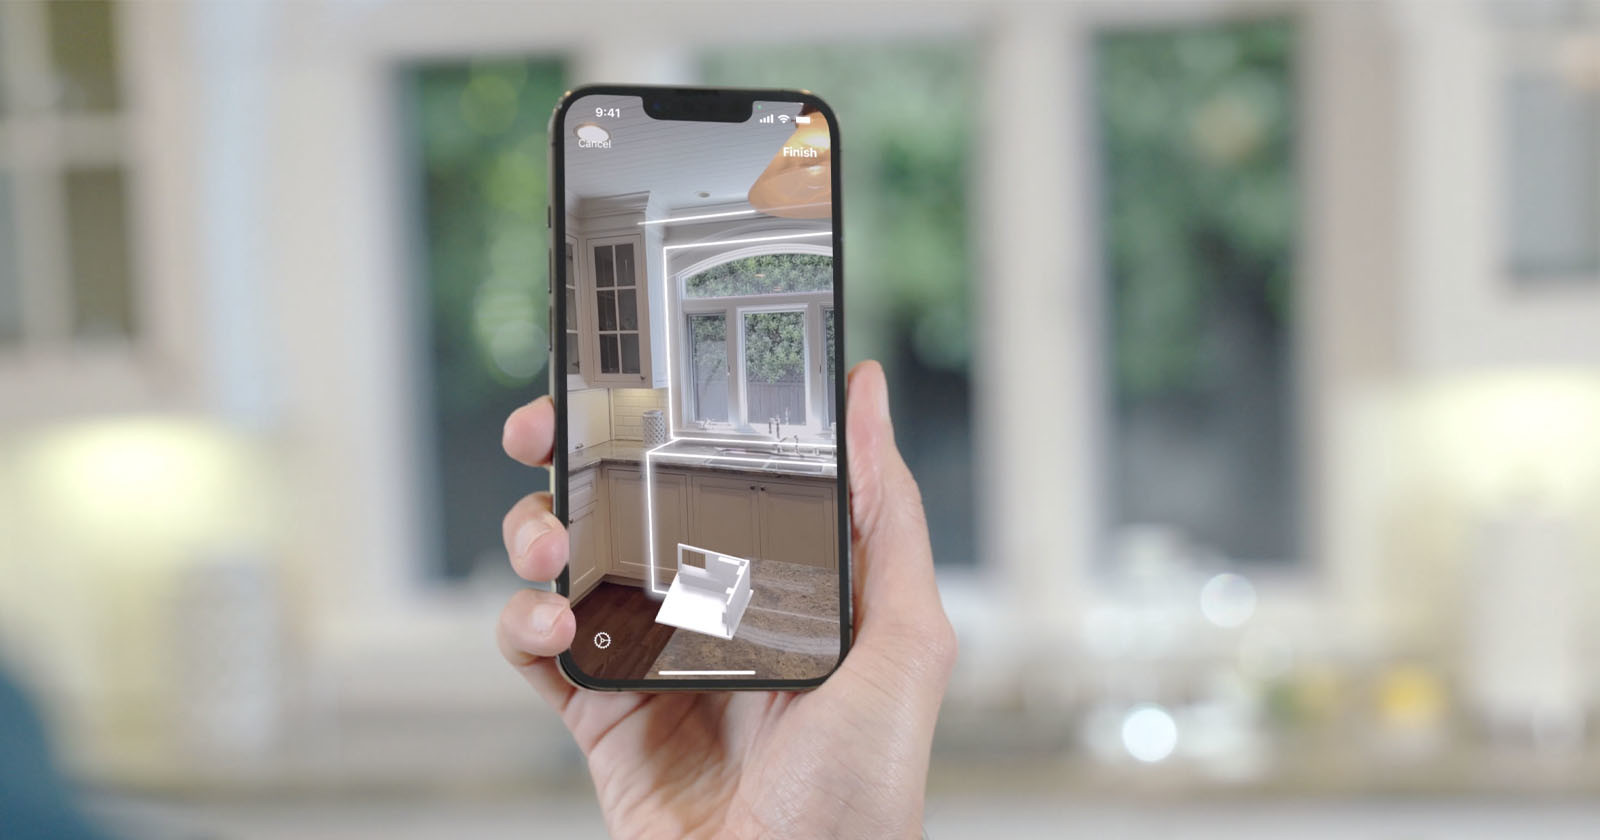 Watch Furniture Get Deleted from a Room in Demo of Apple AR Tech